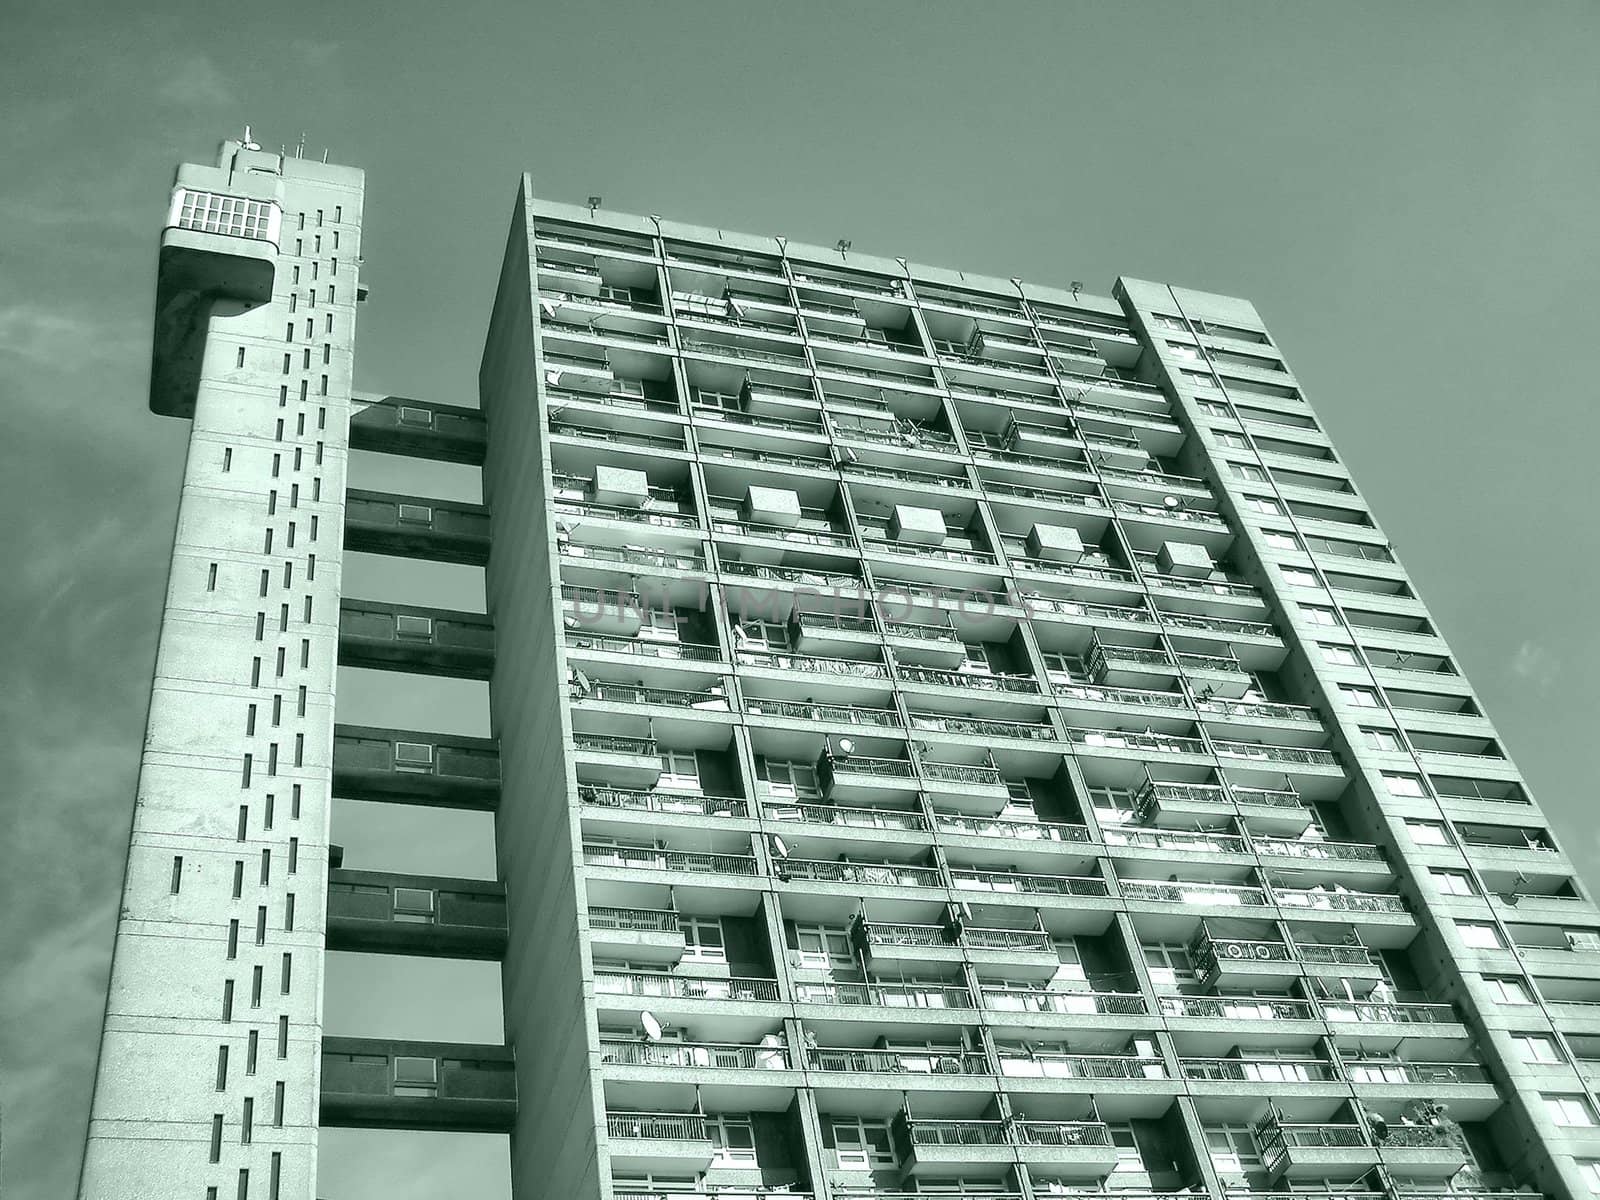 Trellick Tower iconic sixties new brutalist architecture - high dynamic range HDR - black and white